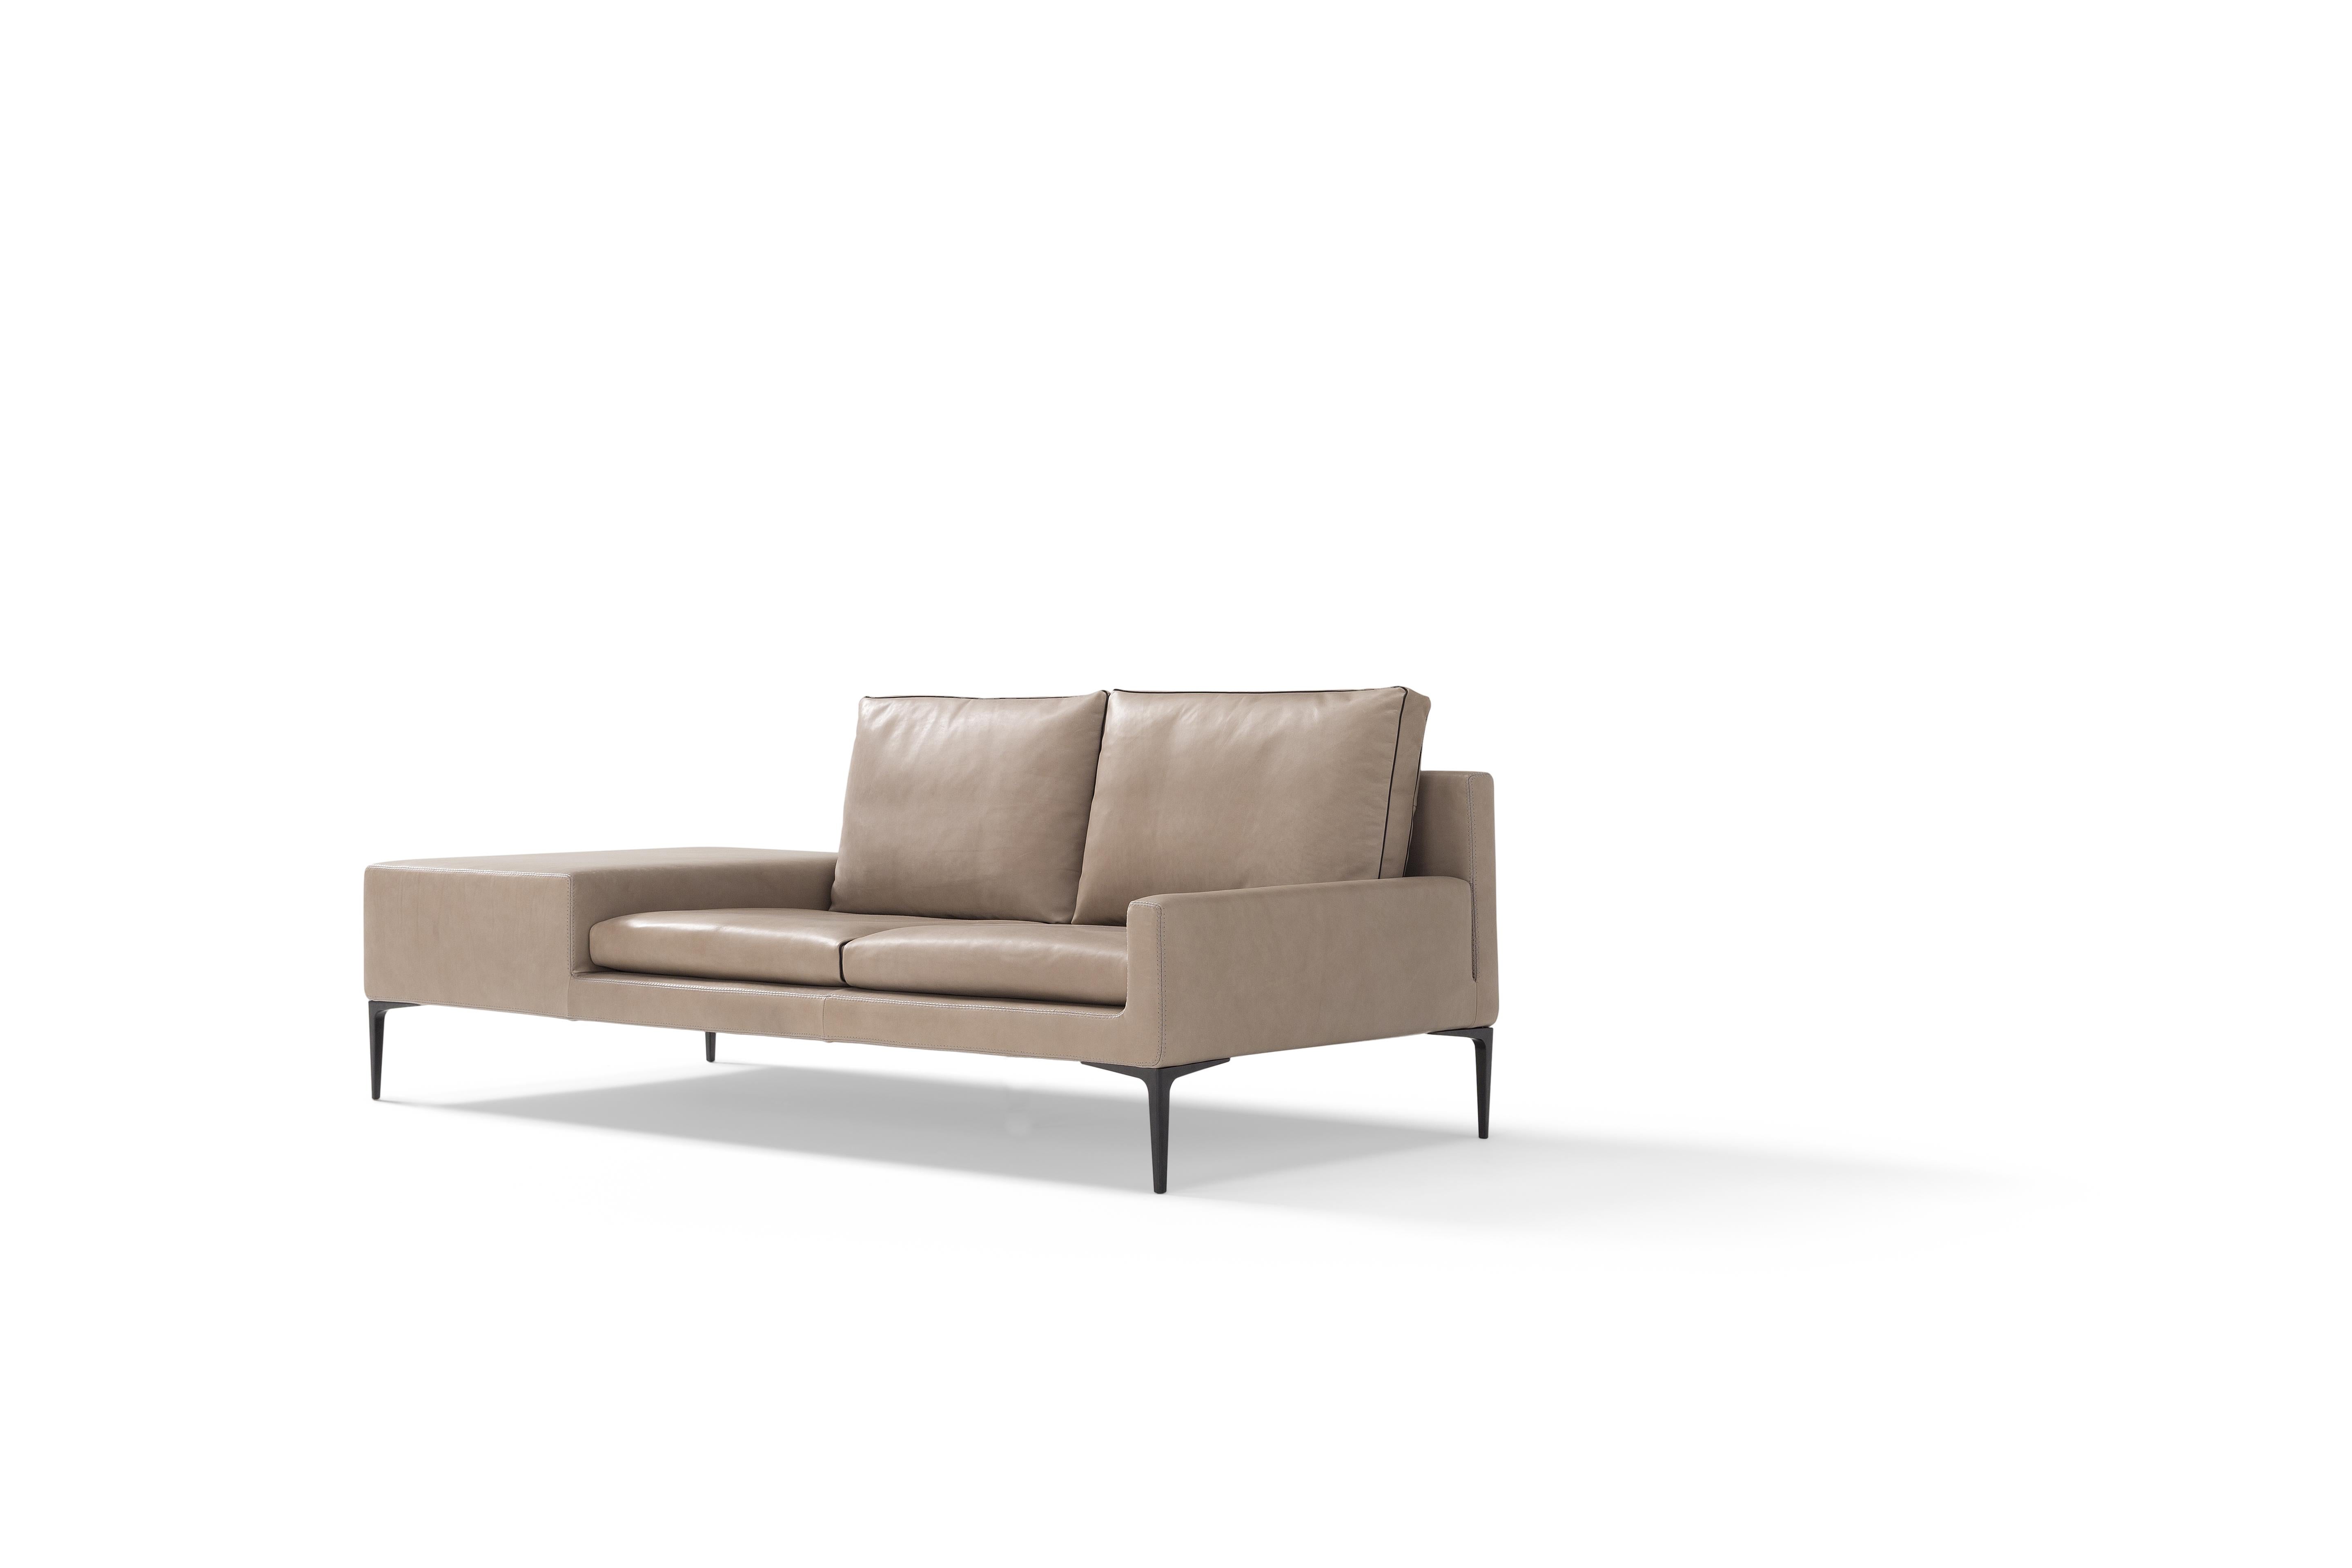 Hand-Crafted Amura 'Elsa' Sofa in Taupe Leather with Connected Table by Luca Scachetti For Sale